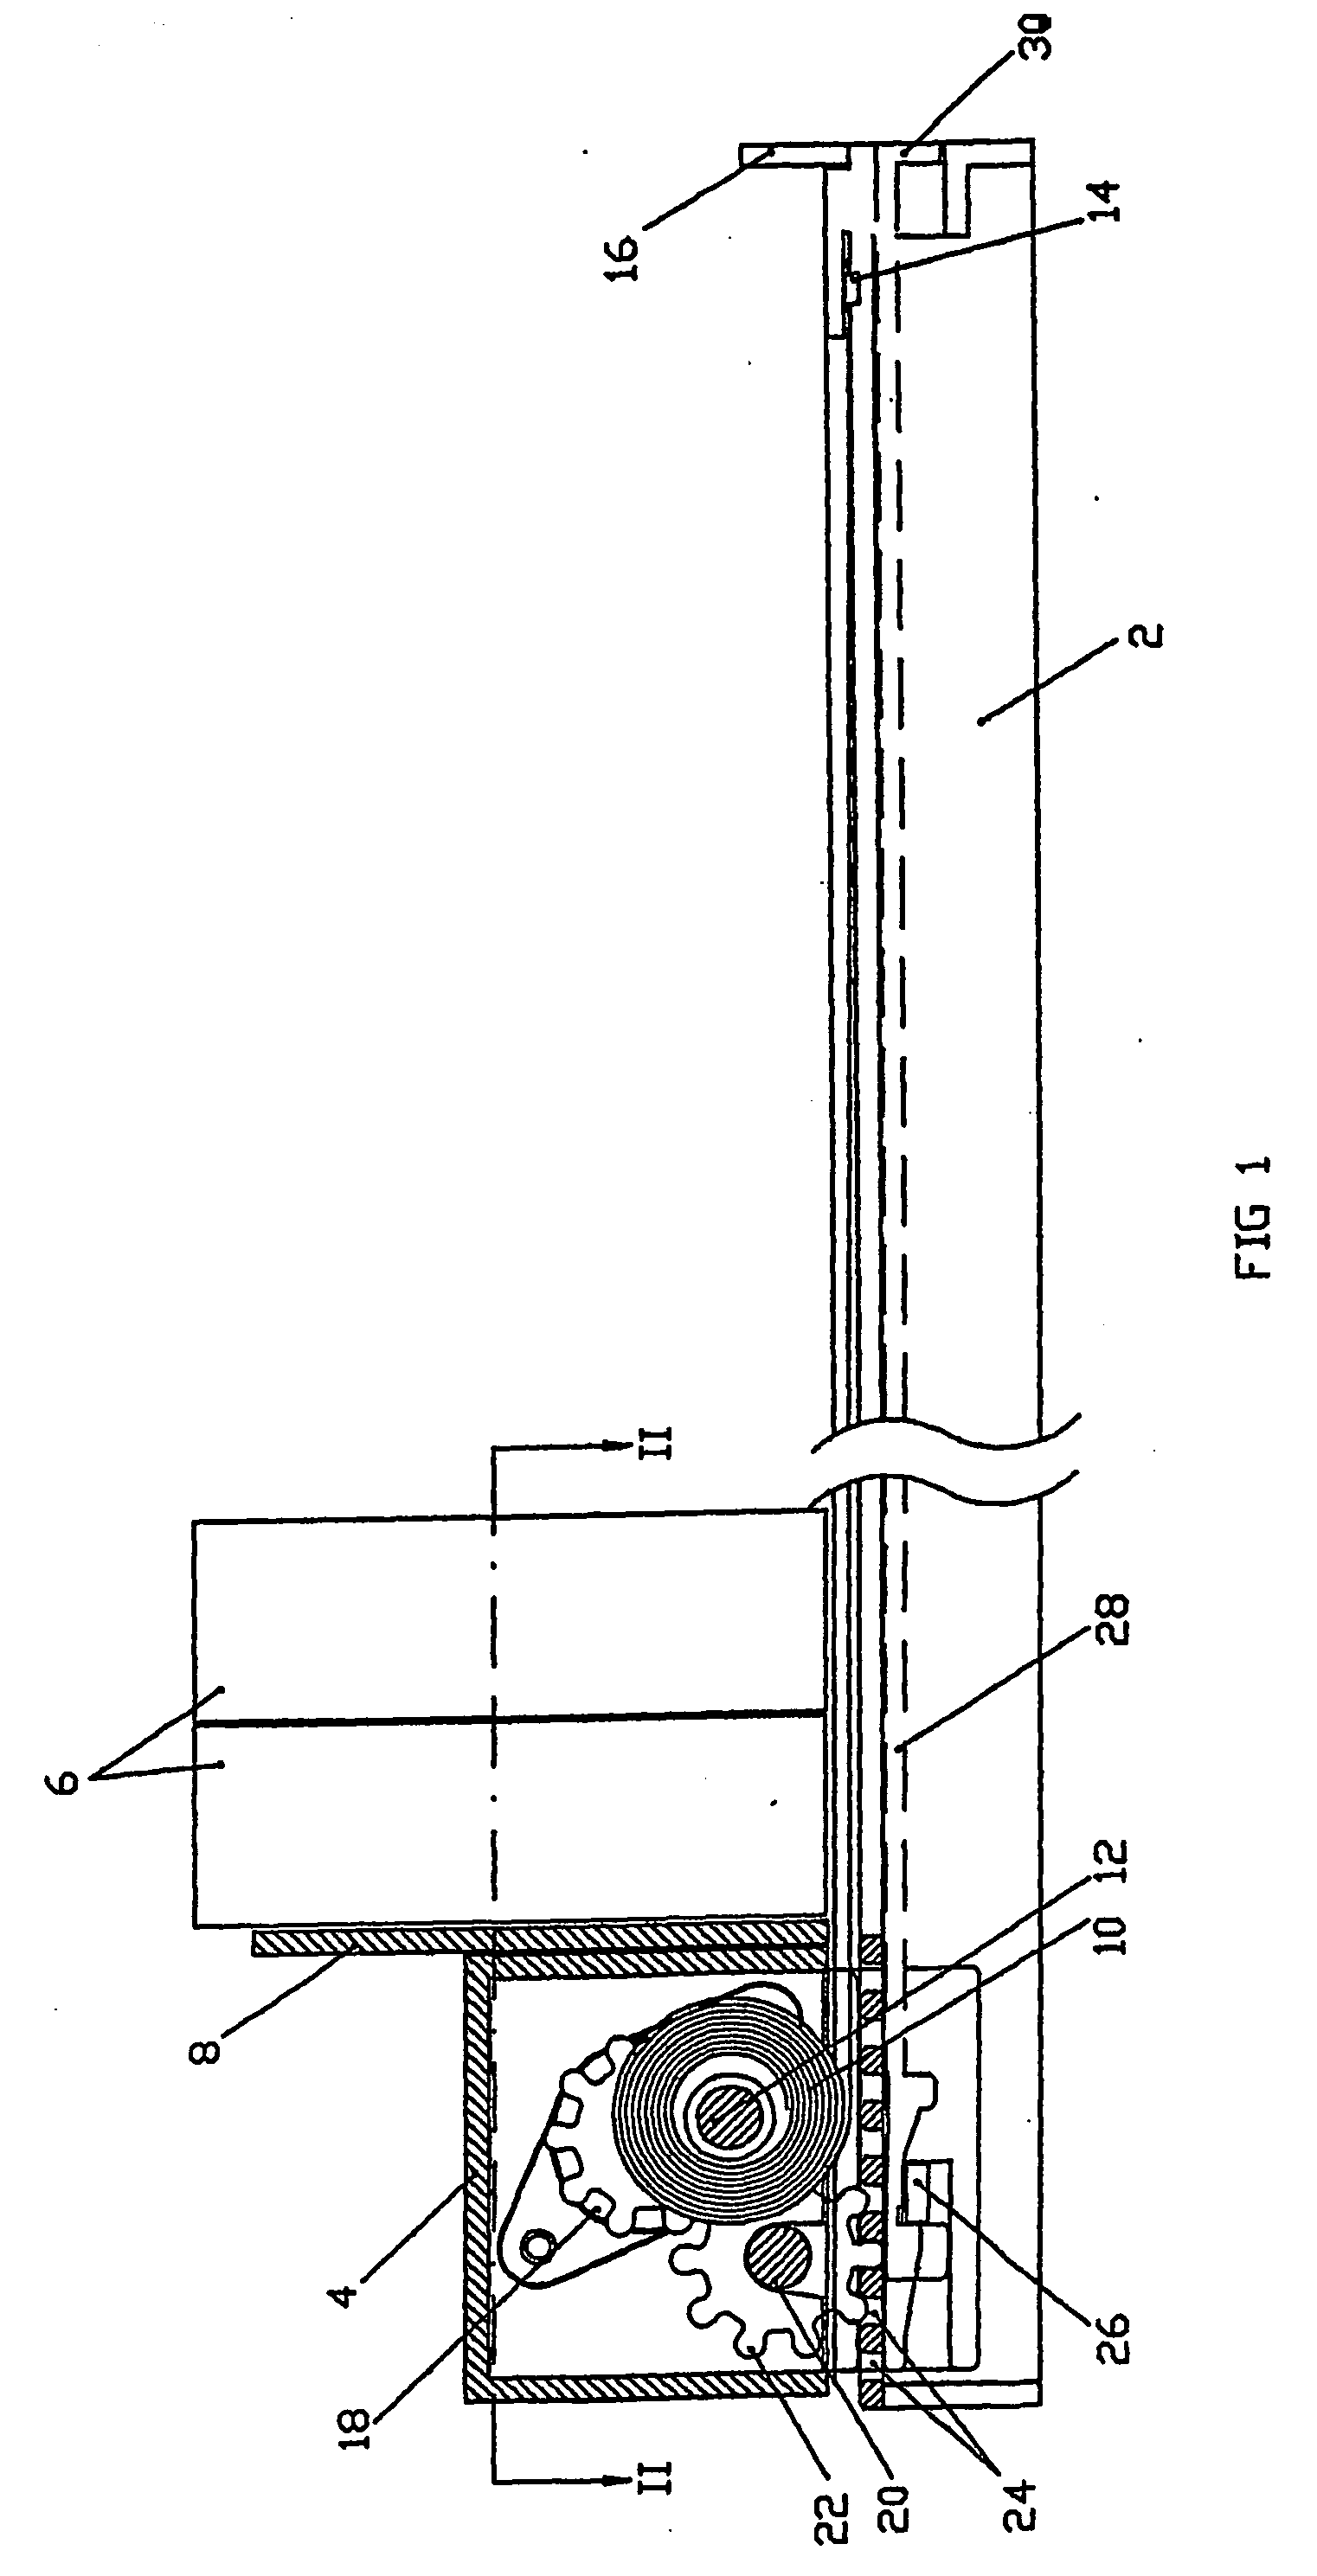 Pusher apparatus for merchandise